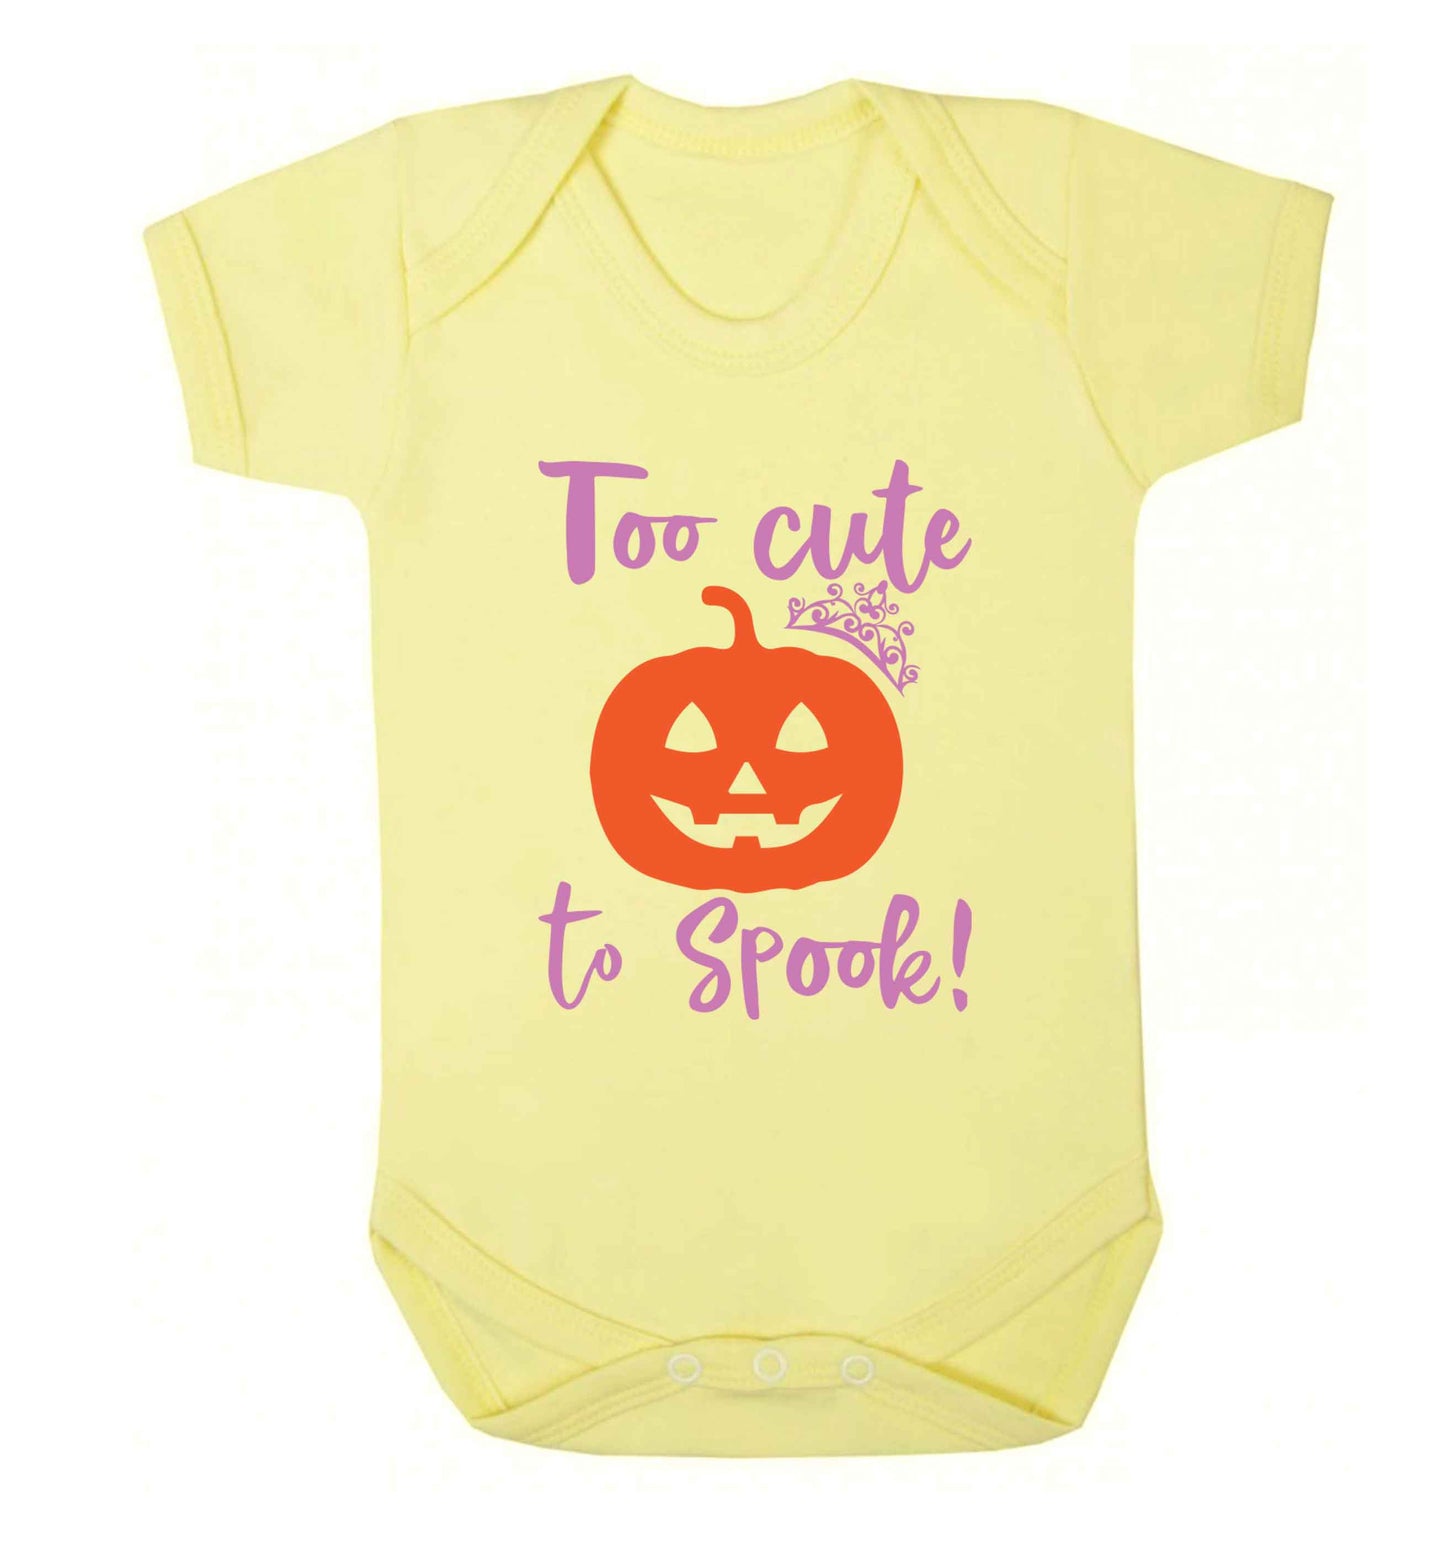 Too cute to spook! Baby Vest pale yellow 18-24 months